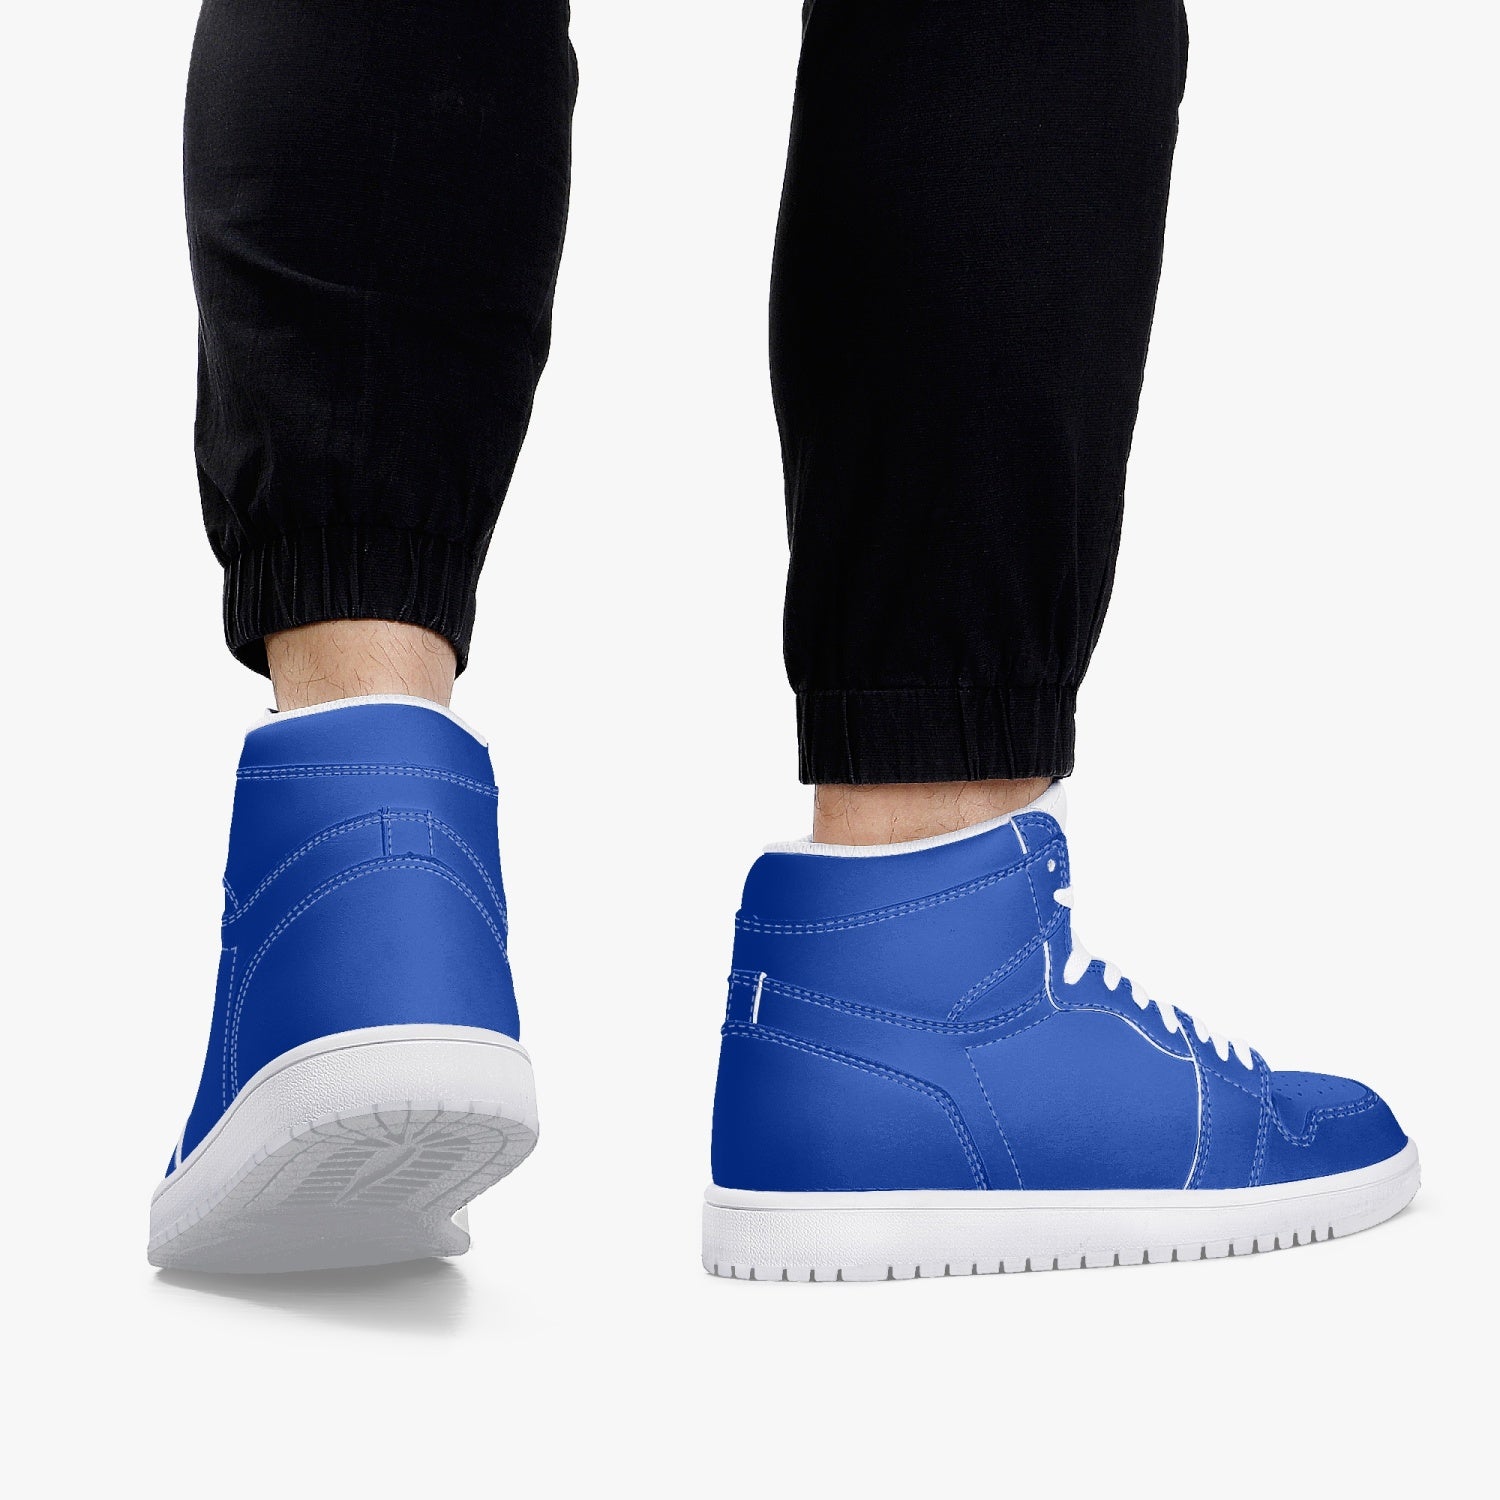 Israel Colors High-Top Sneakers back view on man